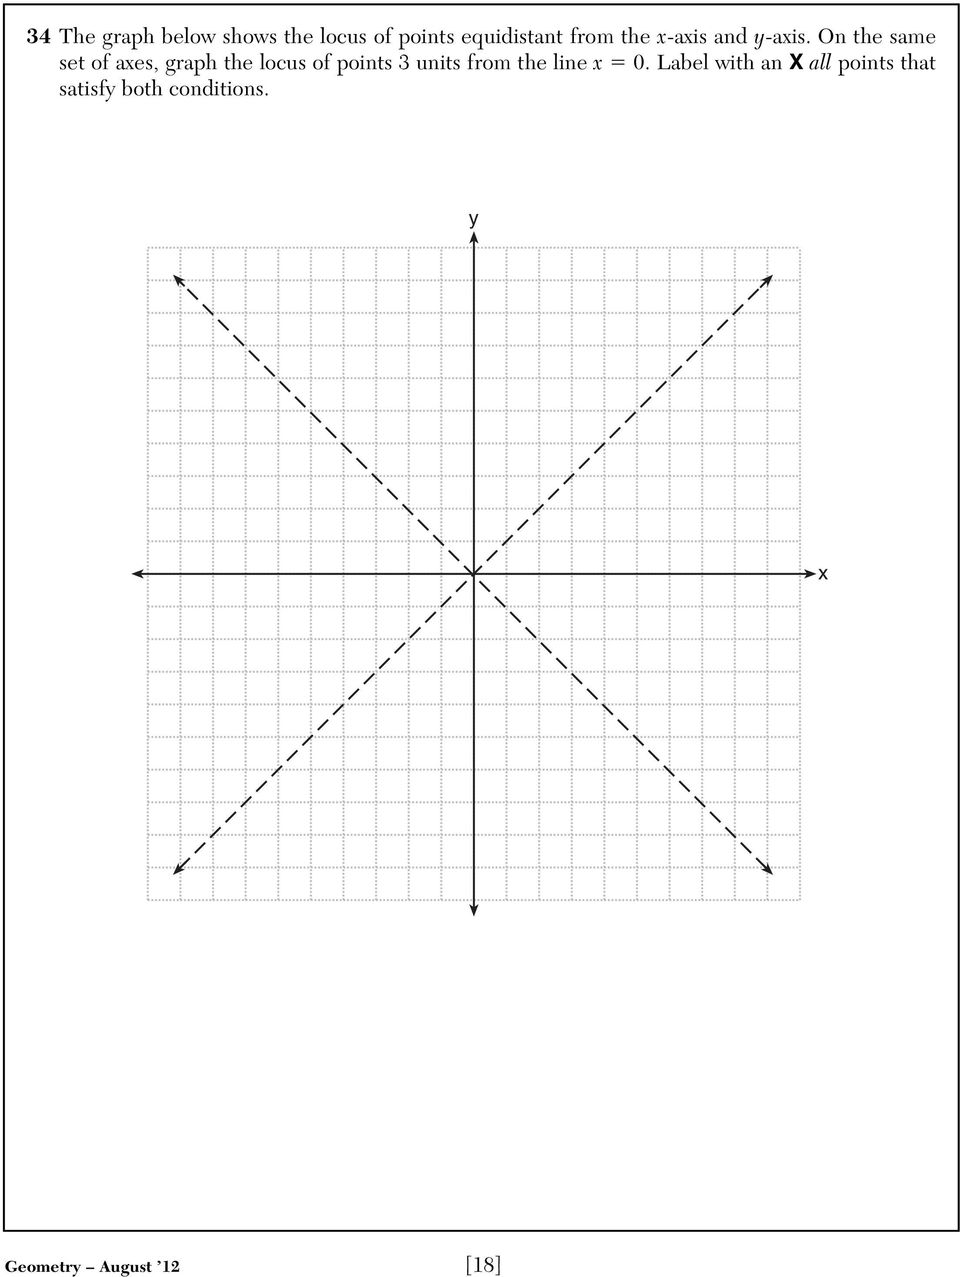 On the same set of axes, graph the locus of points 3 units